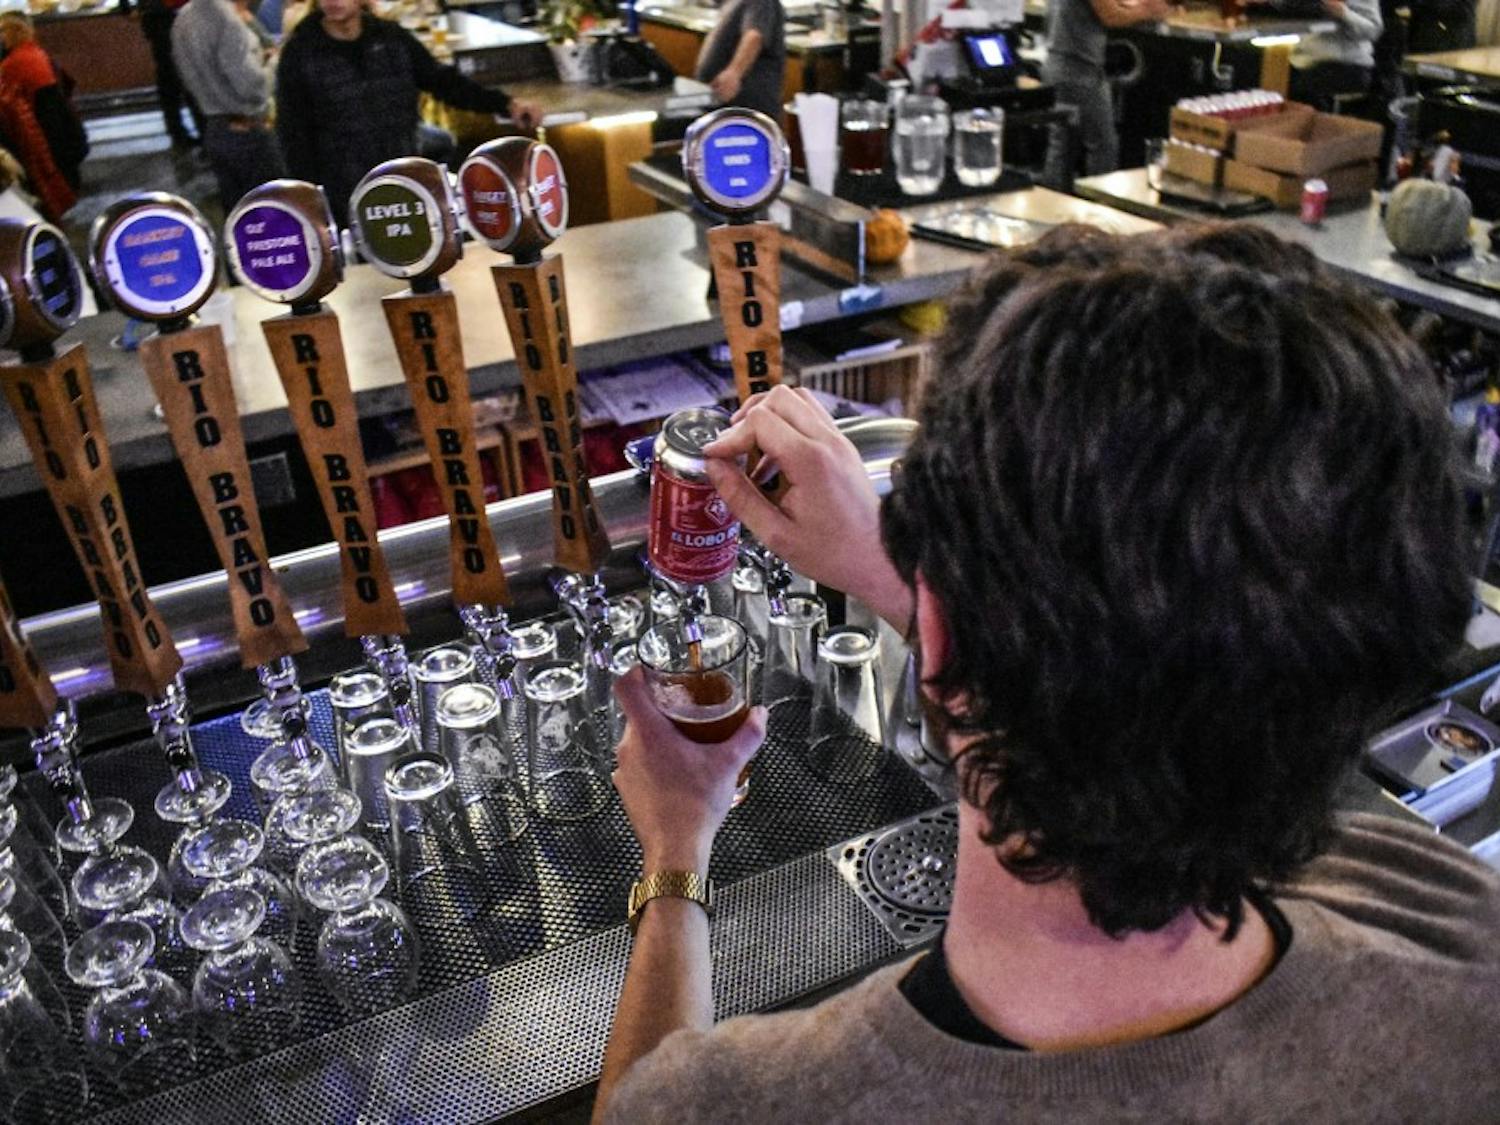 A bartender at the Rio Bravo Brewing Company pours a new beer, the Lobo Rojo.